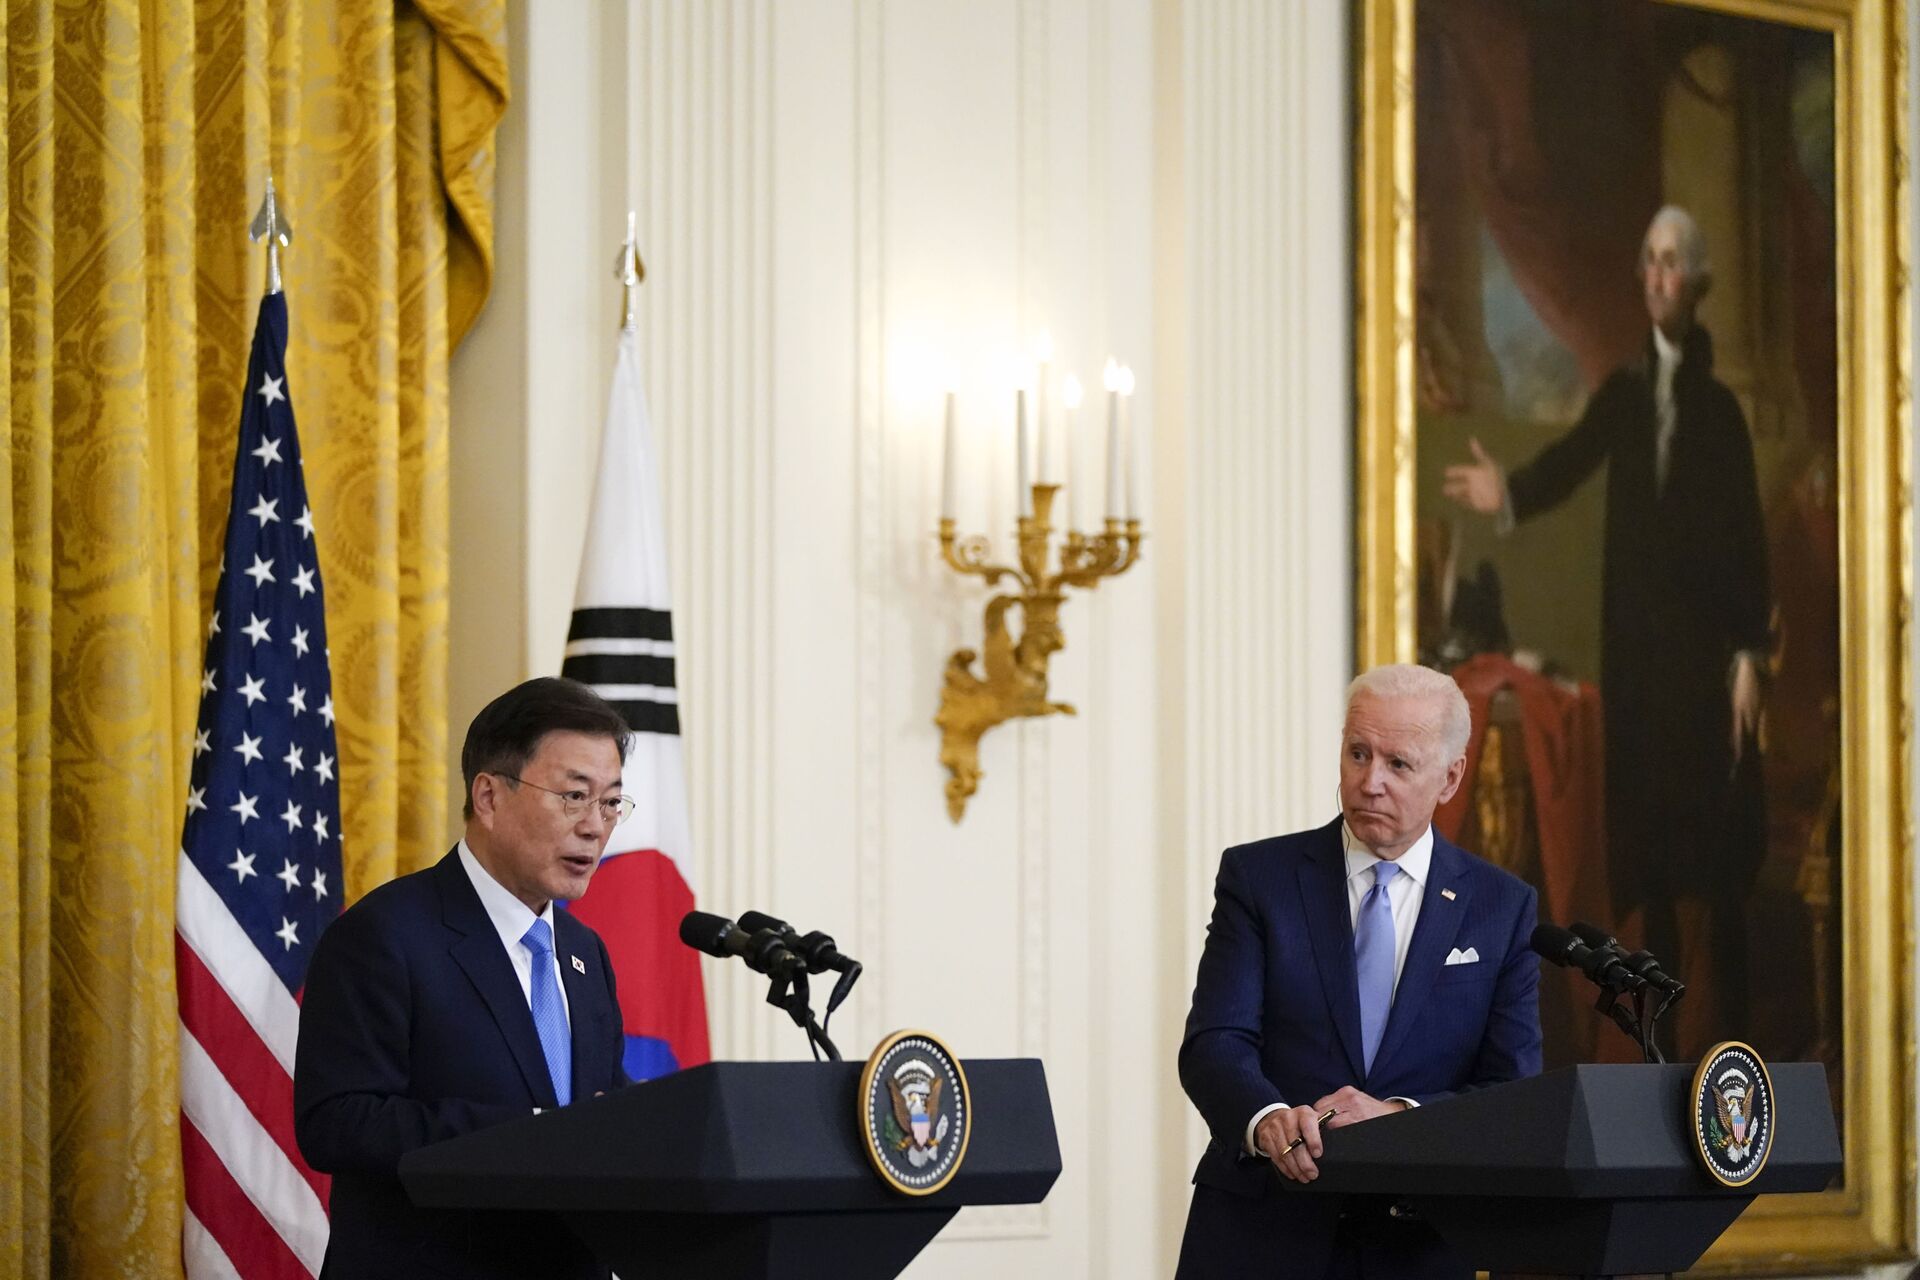 In this May 21, 2021, file photo, President Joe Biden listens as South Korean President Moon Jae-in speaks during a joint news conference in the East Room of the White House, in Washington. - Sputnik International, 1920, 07.09.2021